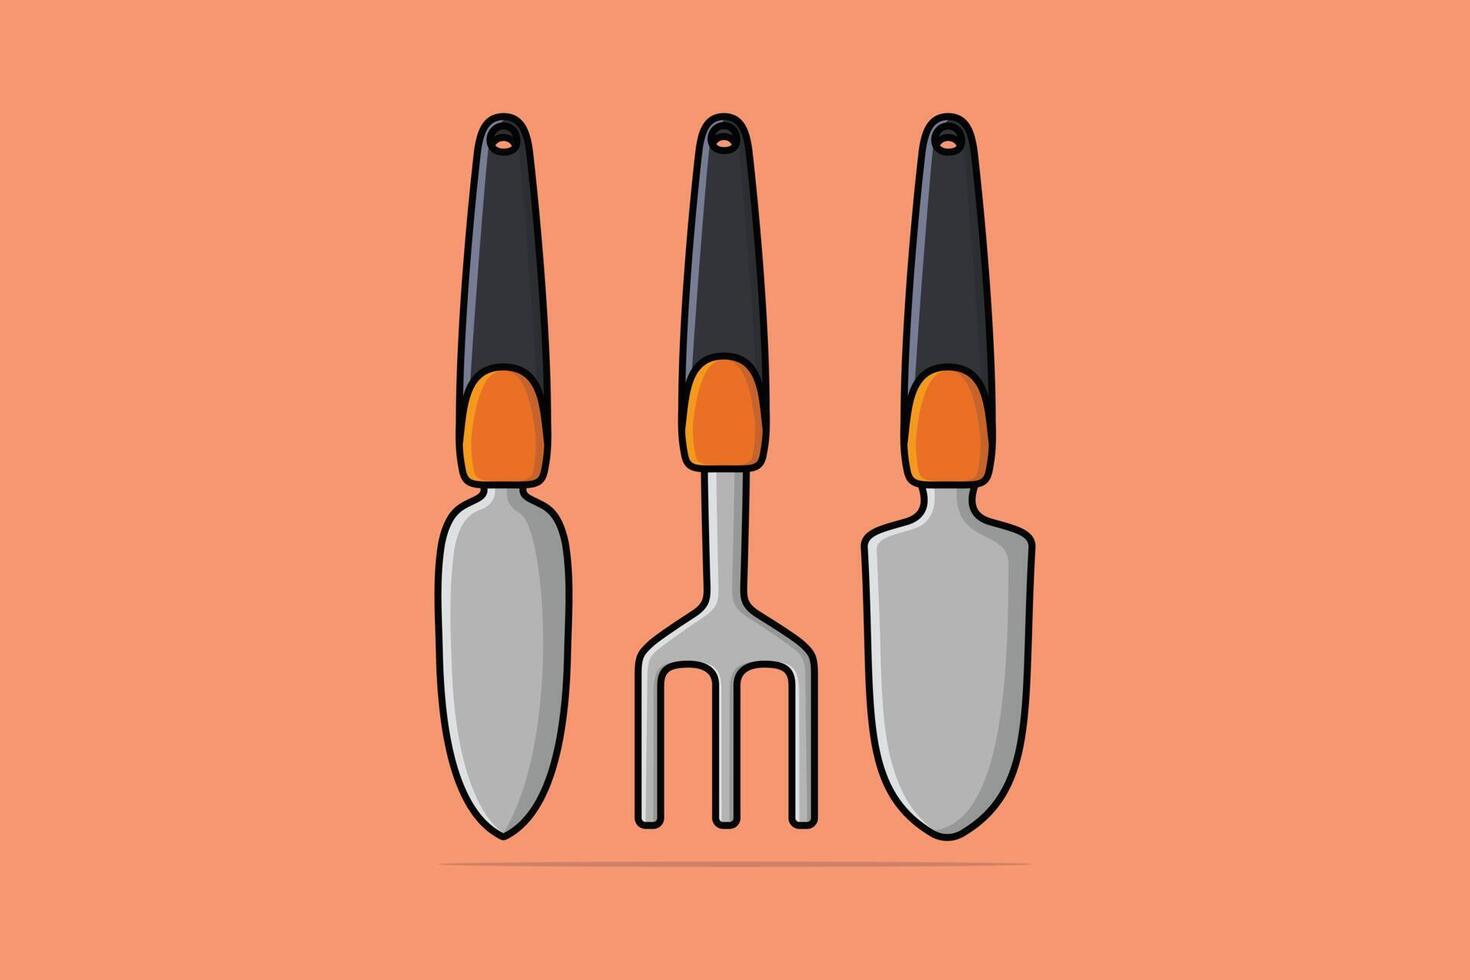 Garden Shovel and Pitchfork tool vector illustration. Construction and Gardening tools object icon concept. Collection of working tool equipment for grounds vector design. Farm work tool concept.